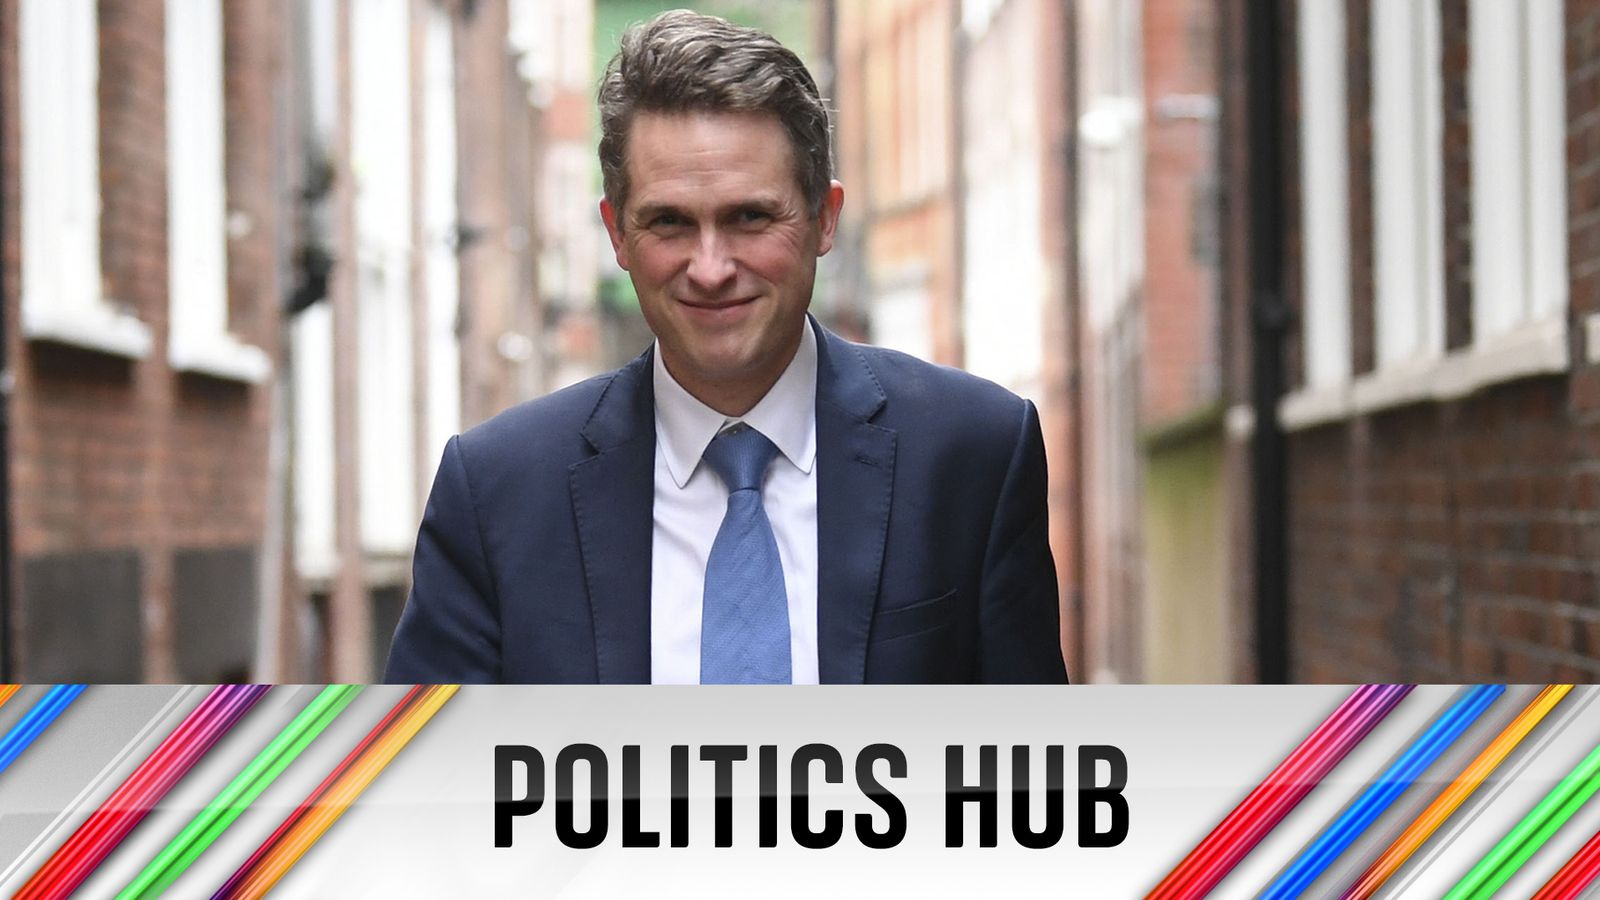 Politics latest: PM may not wait before acting over Williamson bullying allegations; Tory MP responds after being criticised for using 'outdated' ethnic slur